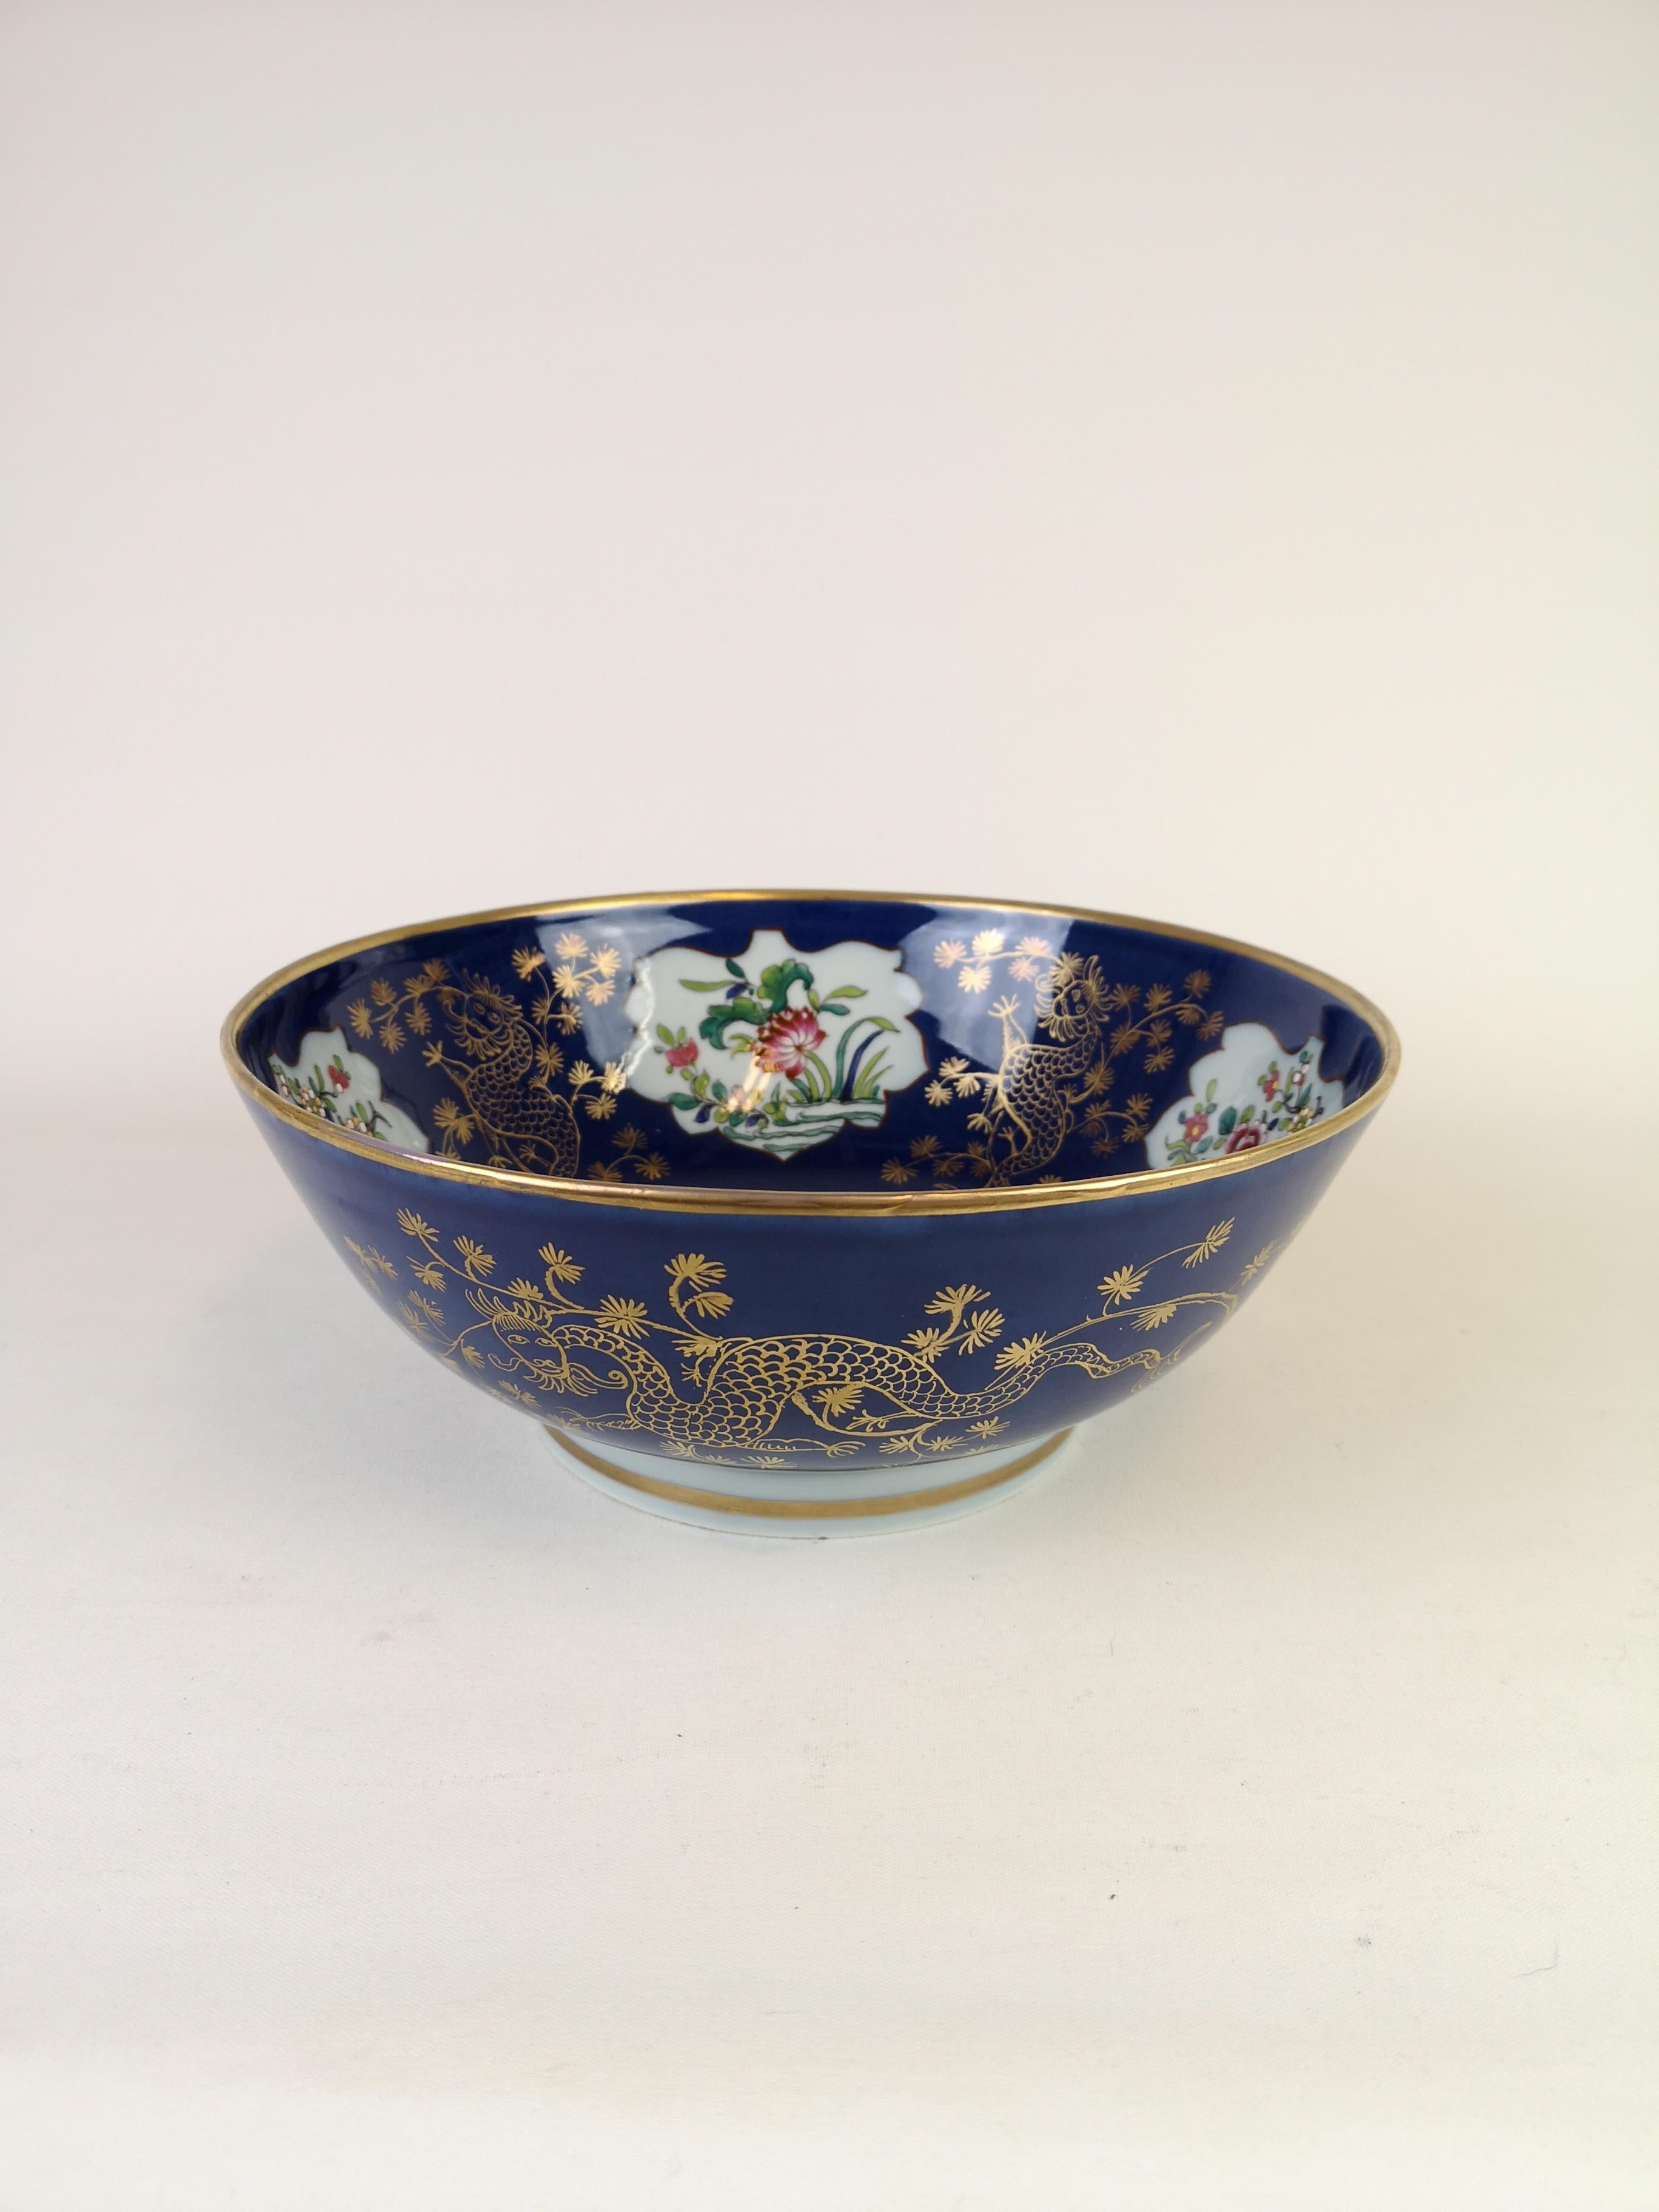 This bowl is made with high quality. It was made by the best porcelain makers and painters in France to imitate the chines porcelain. This blue bowl is made with golden paint and incredible fine art work inside of the bowl. Made in the late 1900 or